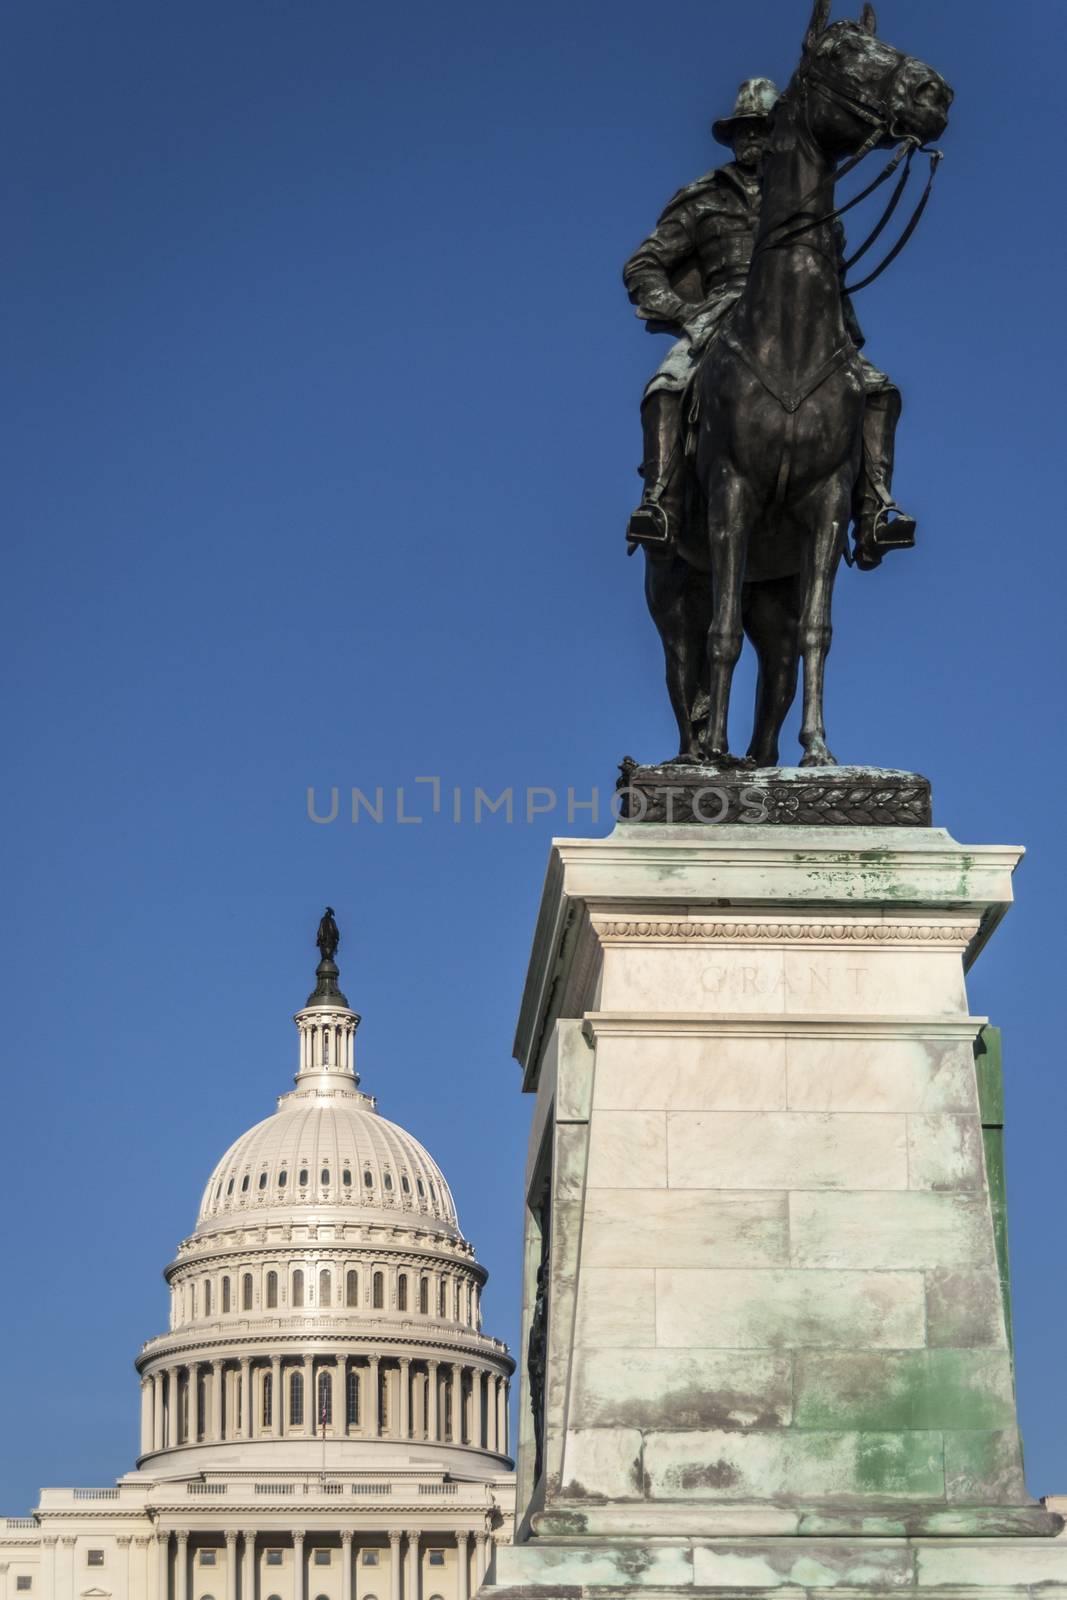 General grant statue in front of US capitol, Washington DC. by tanaonte